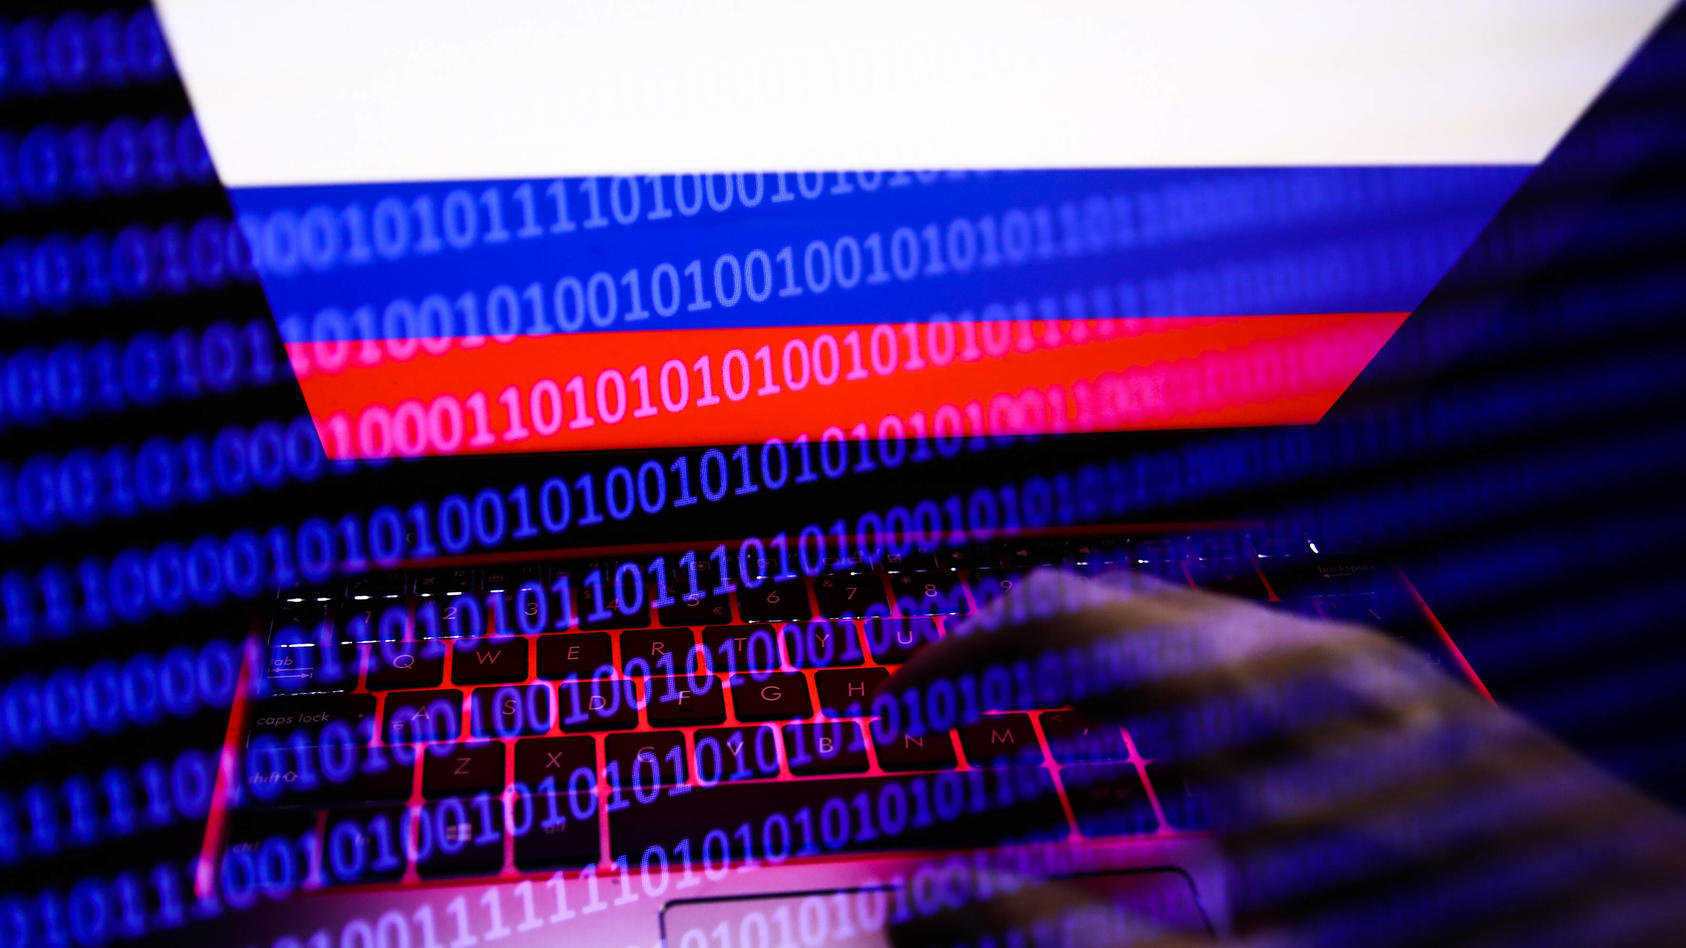 Russia, Ukraine And Internet Hacking Photo Illustrtions Russian flag displayed on a laptop screen and binary code code displayed on a screen are seen in this multiple exposure illustration photo taken in Krakow, Poland on February 16, 2022. Photo ill